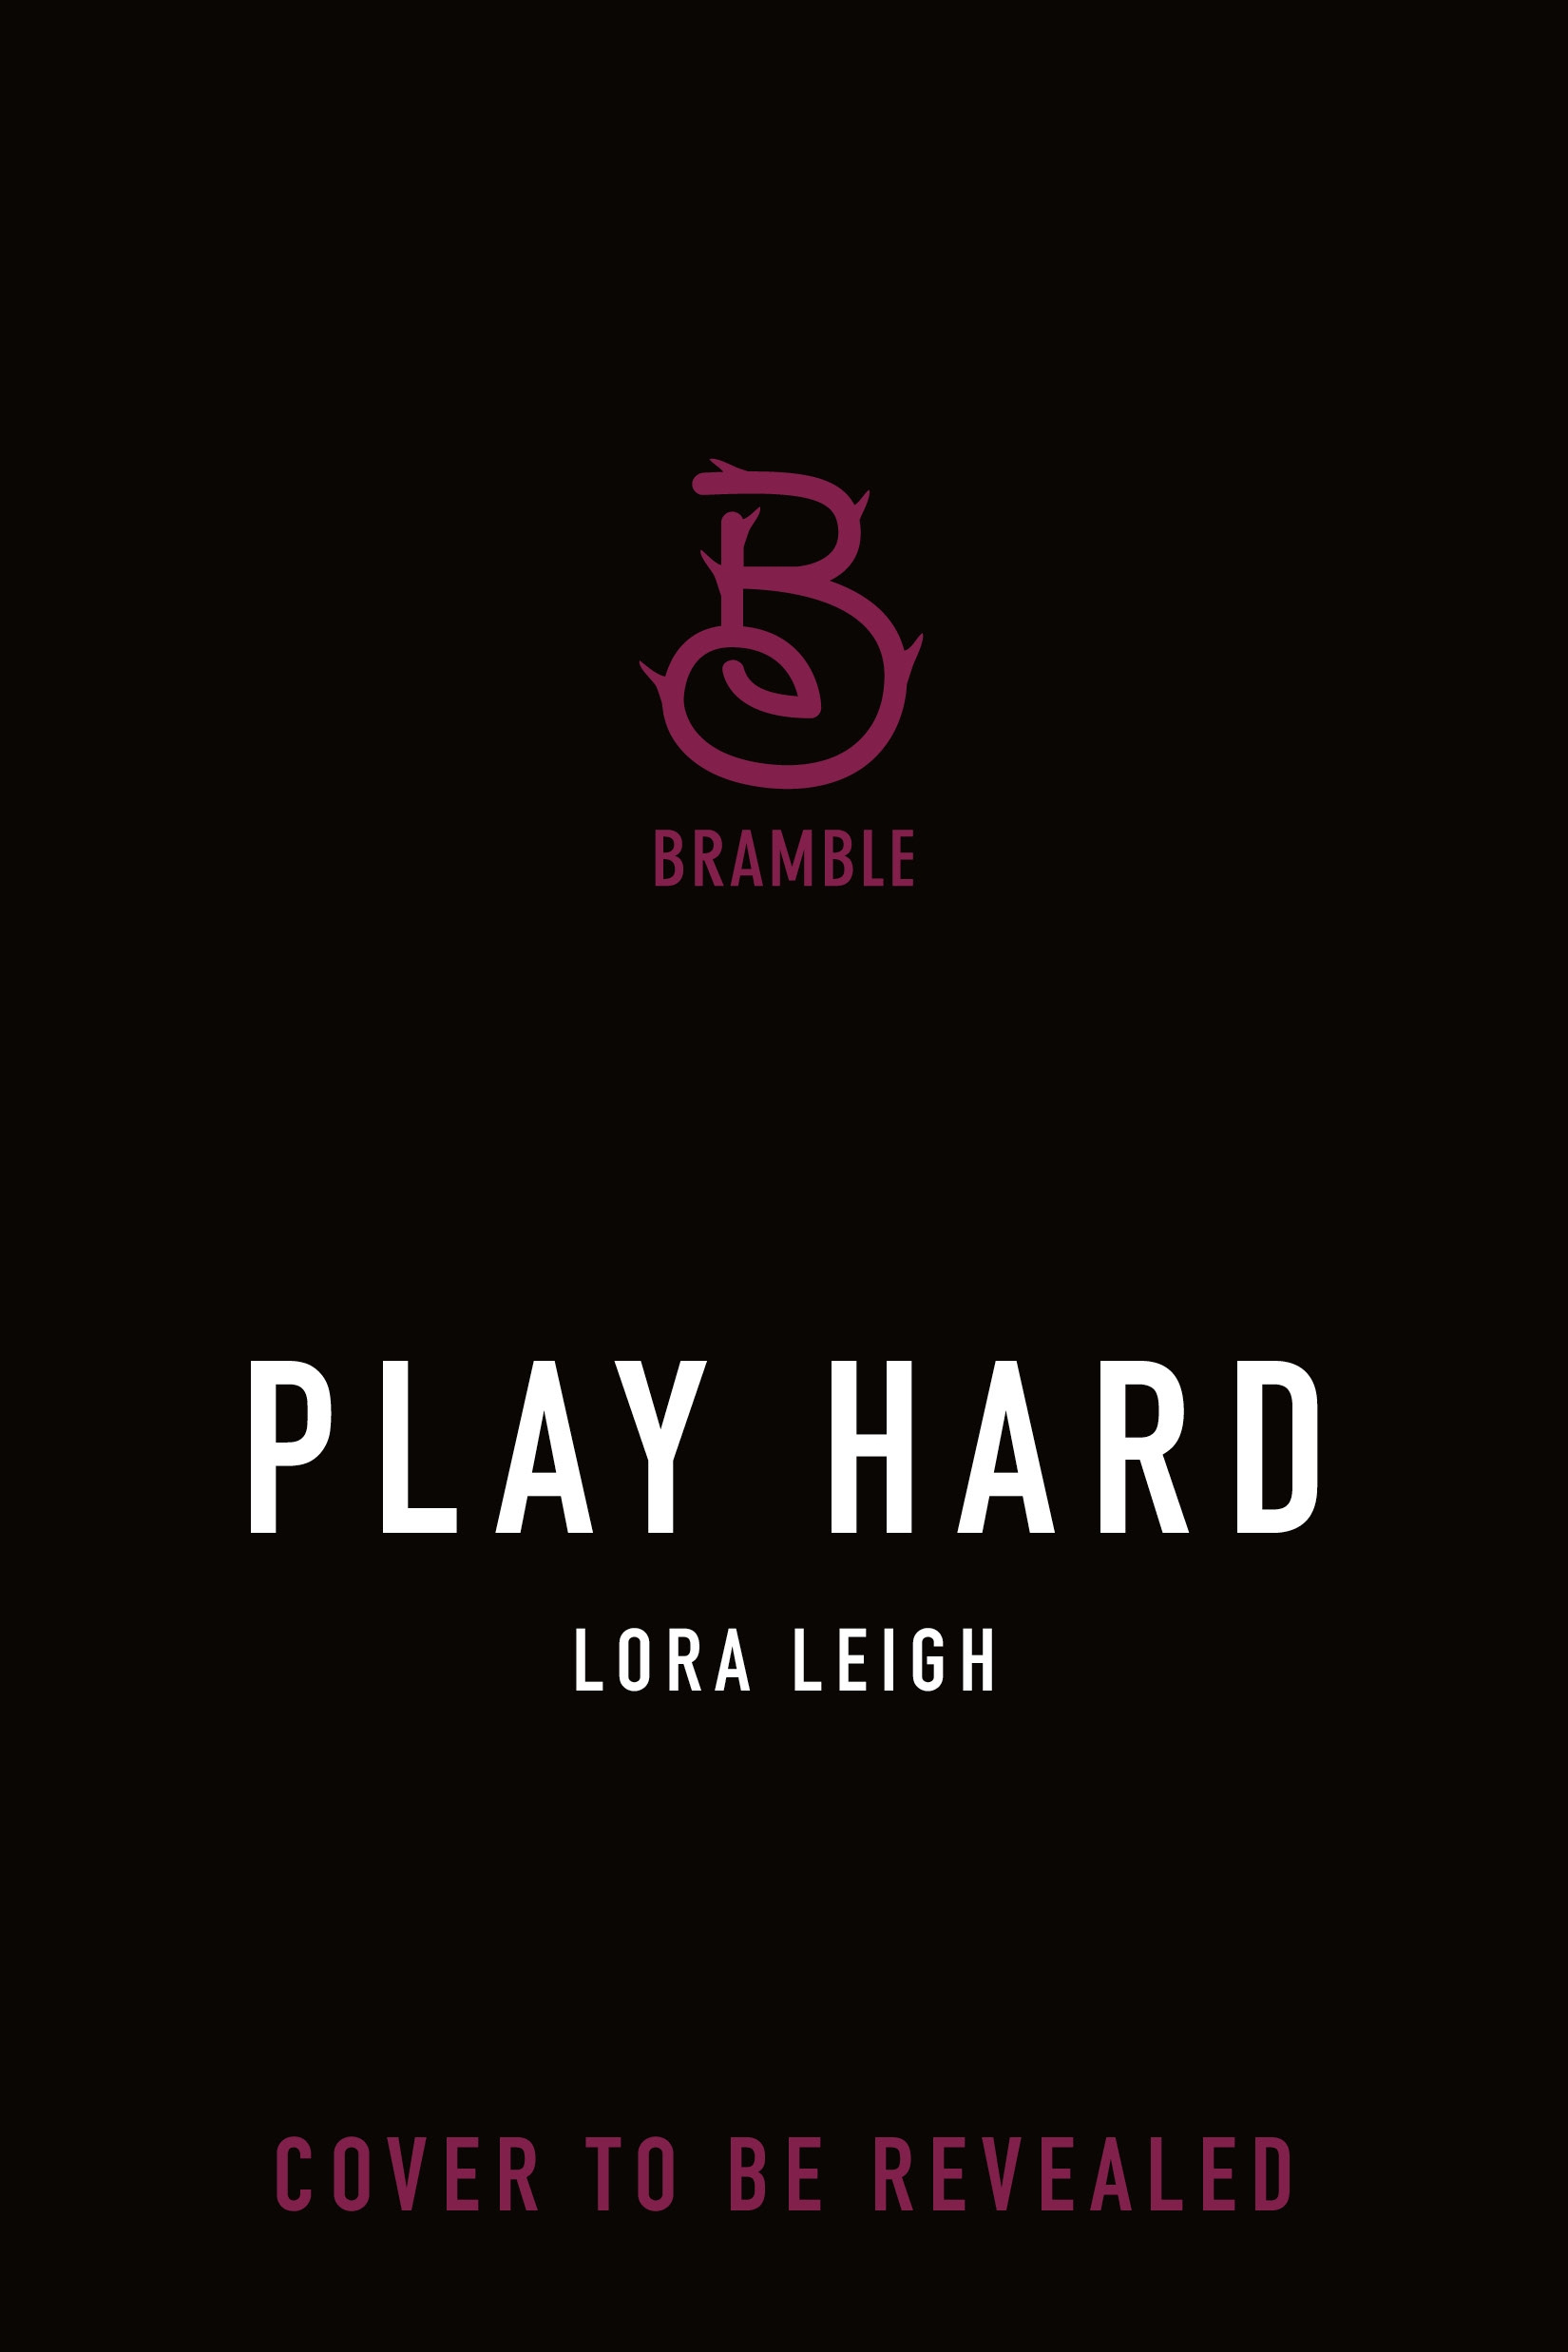 Play Hard by Lora Leigh